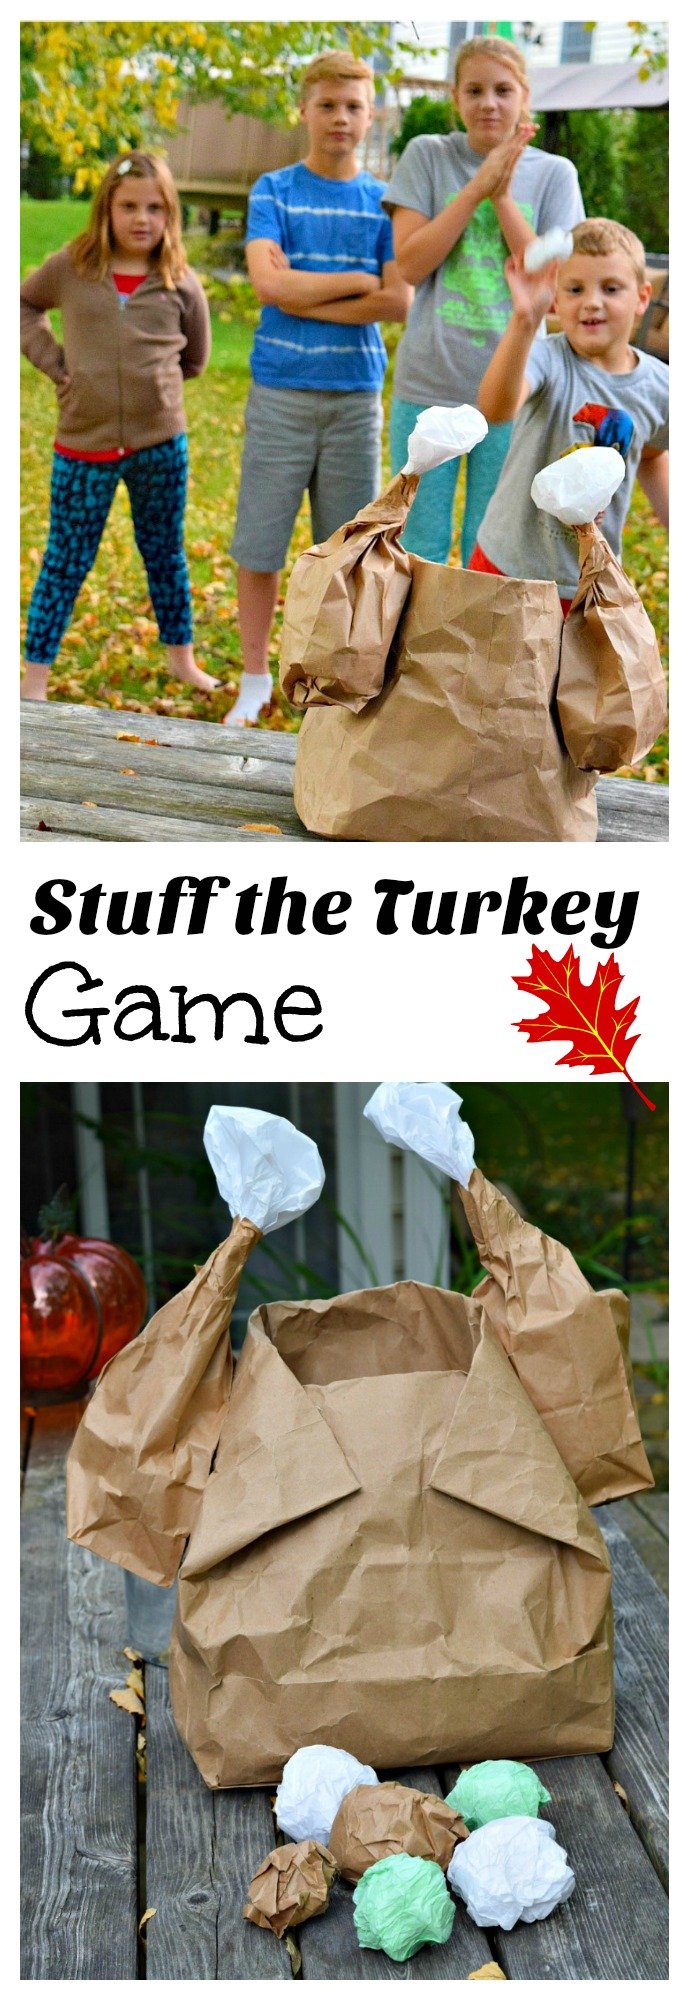 It's a fun Stuff the Turkey Game for a fun Thanksgiving Game - Perfect for preschool or elementary school. The kids love it, and it's easy to make! www.kidfriendlythingstodo.com